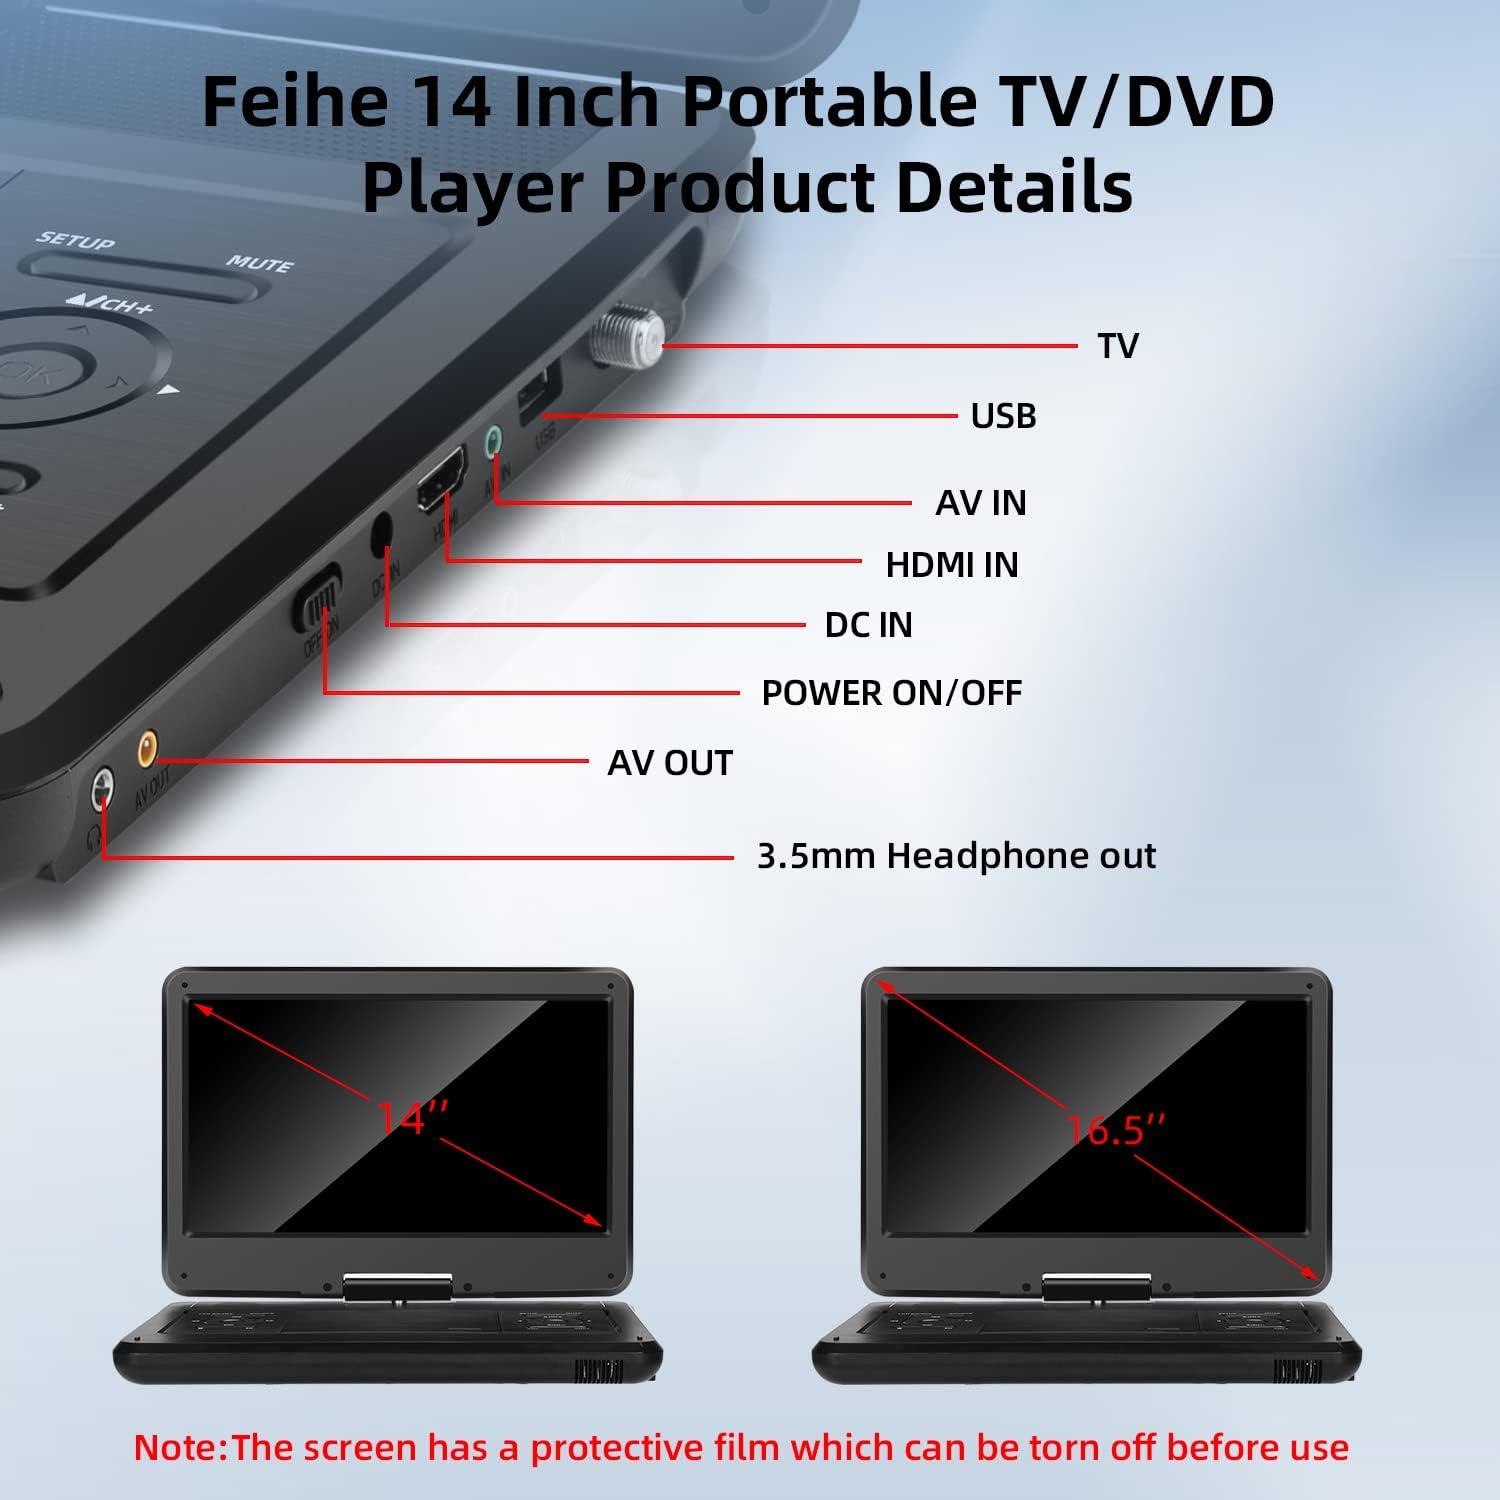 Feihe 14 Inch Portable TV/DVD Player Combo with HD Swivel LED